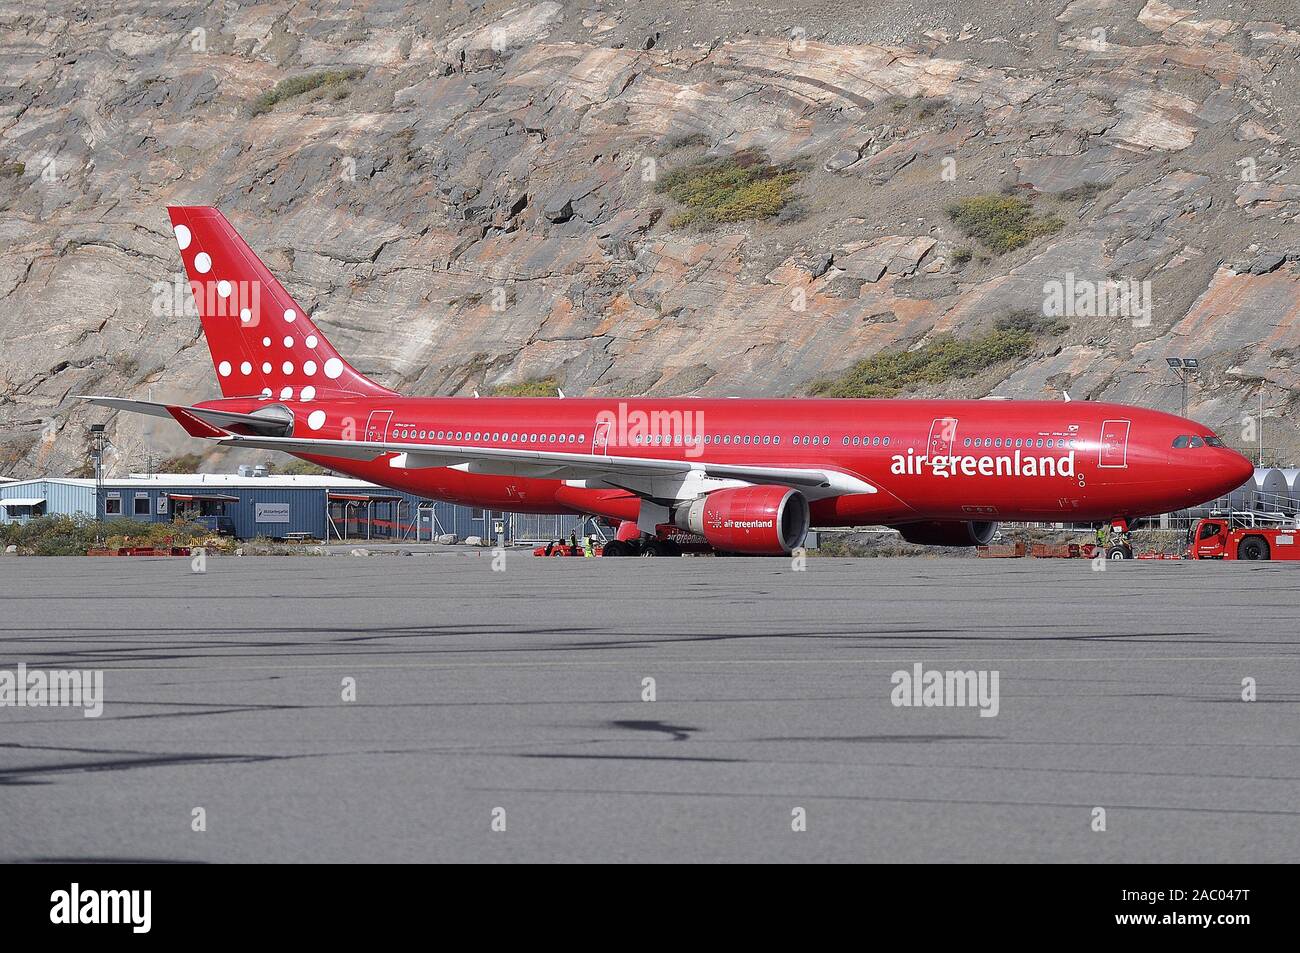 CLIMATE CHANGE - GREENLAND'S KANGERLUSSUAQ (SONDRE STROMFJORD) AIRPORT LIKELY TO CLOSE WITHIN FIVE YEARS DUE TO PERMAFROST UNDERNEATH THE RUNWAY THAWING. Stock Photo